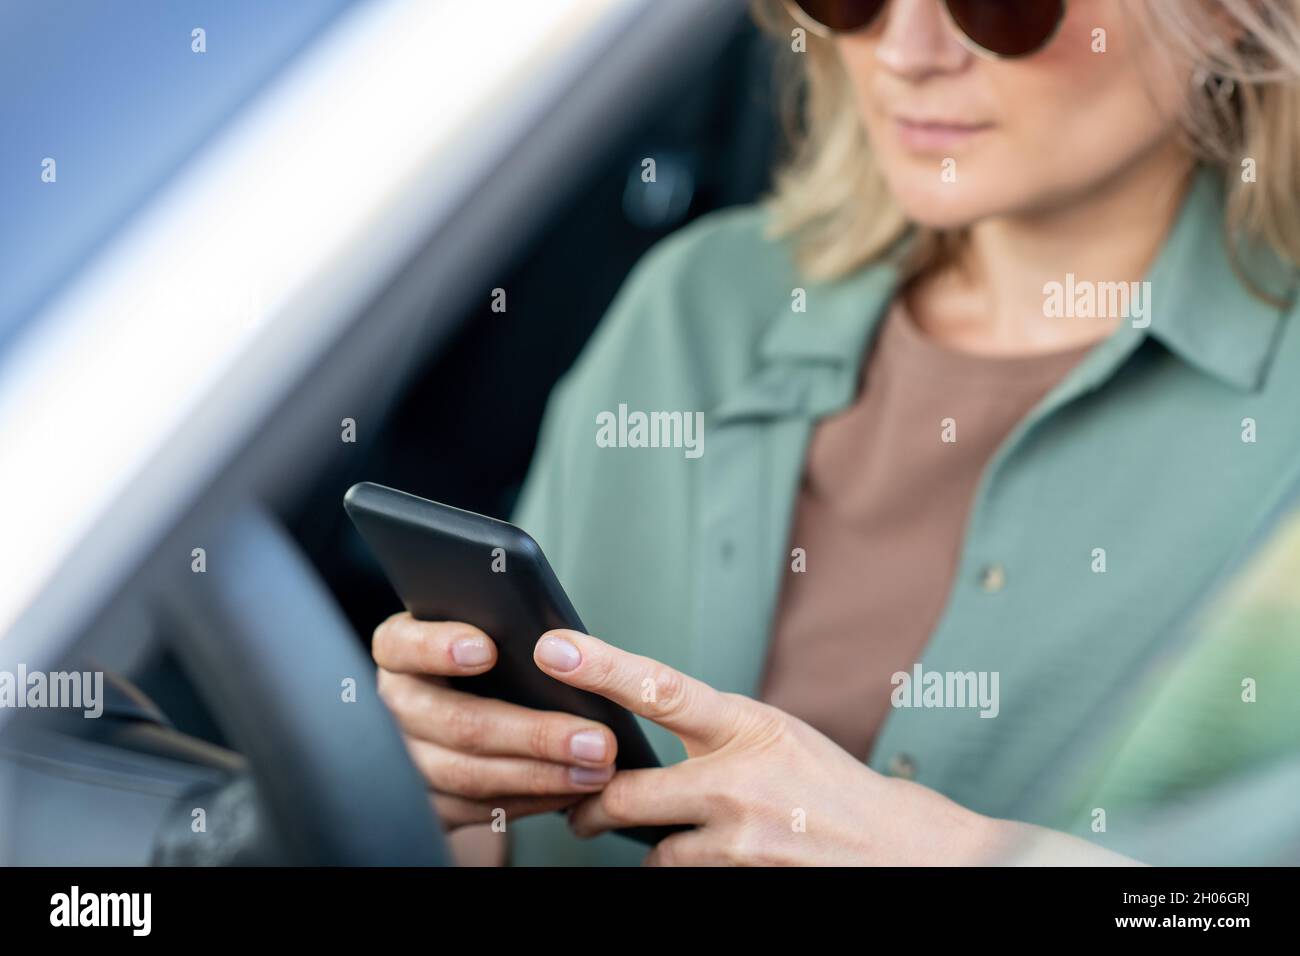 Hands of elegant female scrolling in smartphone while sitting by steering wheel in car Stock Photo